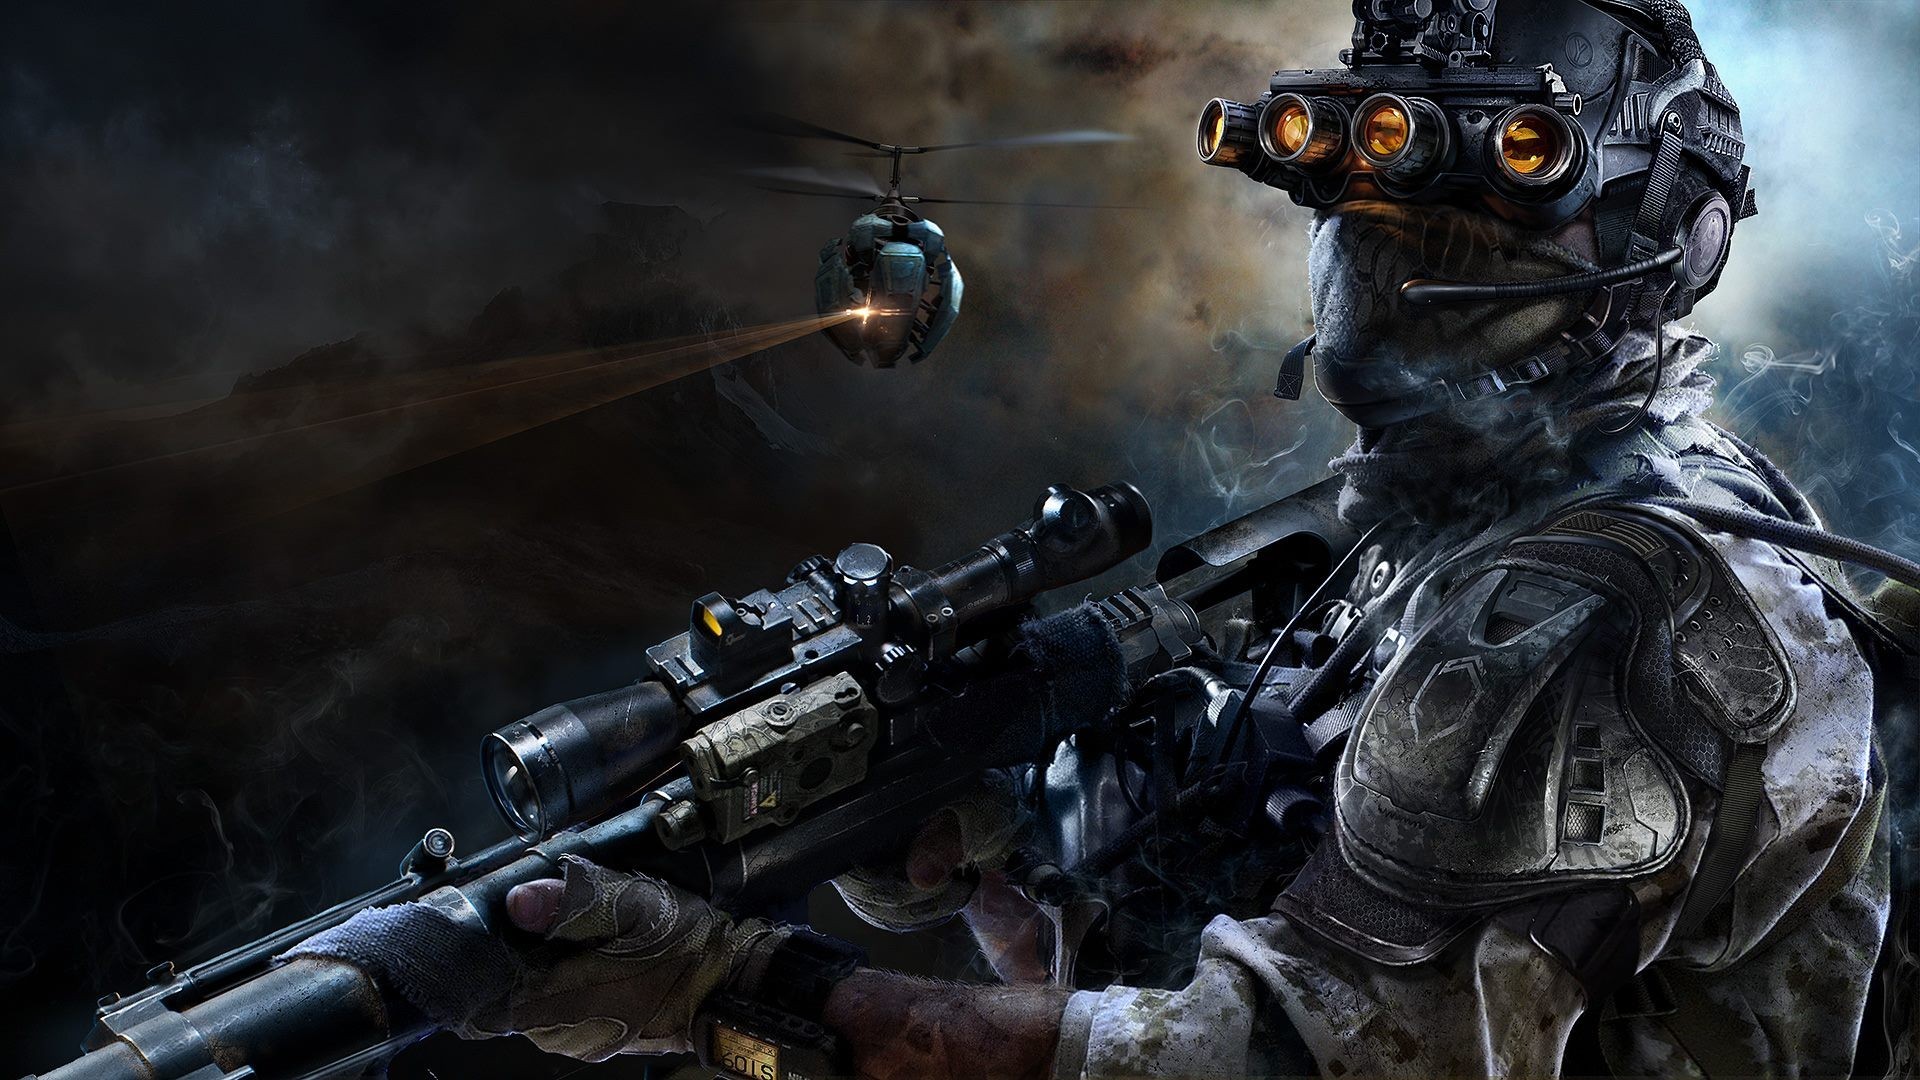 1920x1080 Sniper: Ghost Warrior 3 wallpapers cool